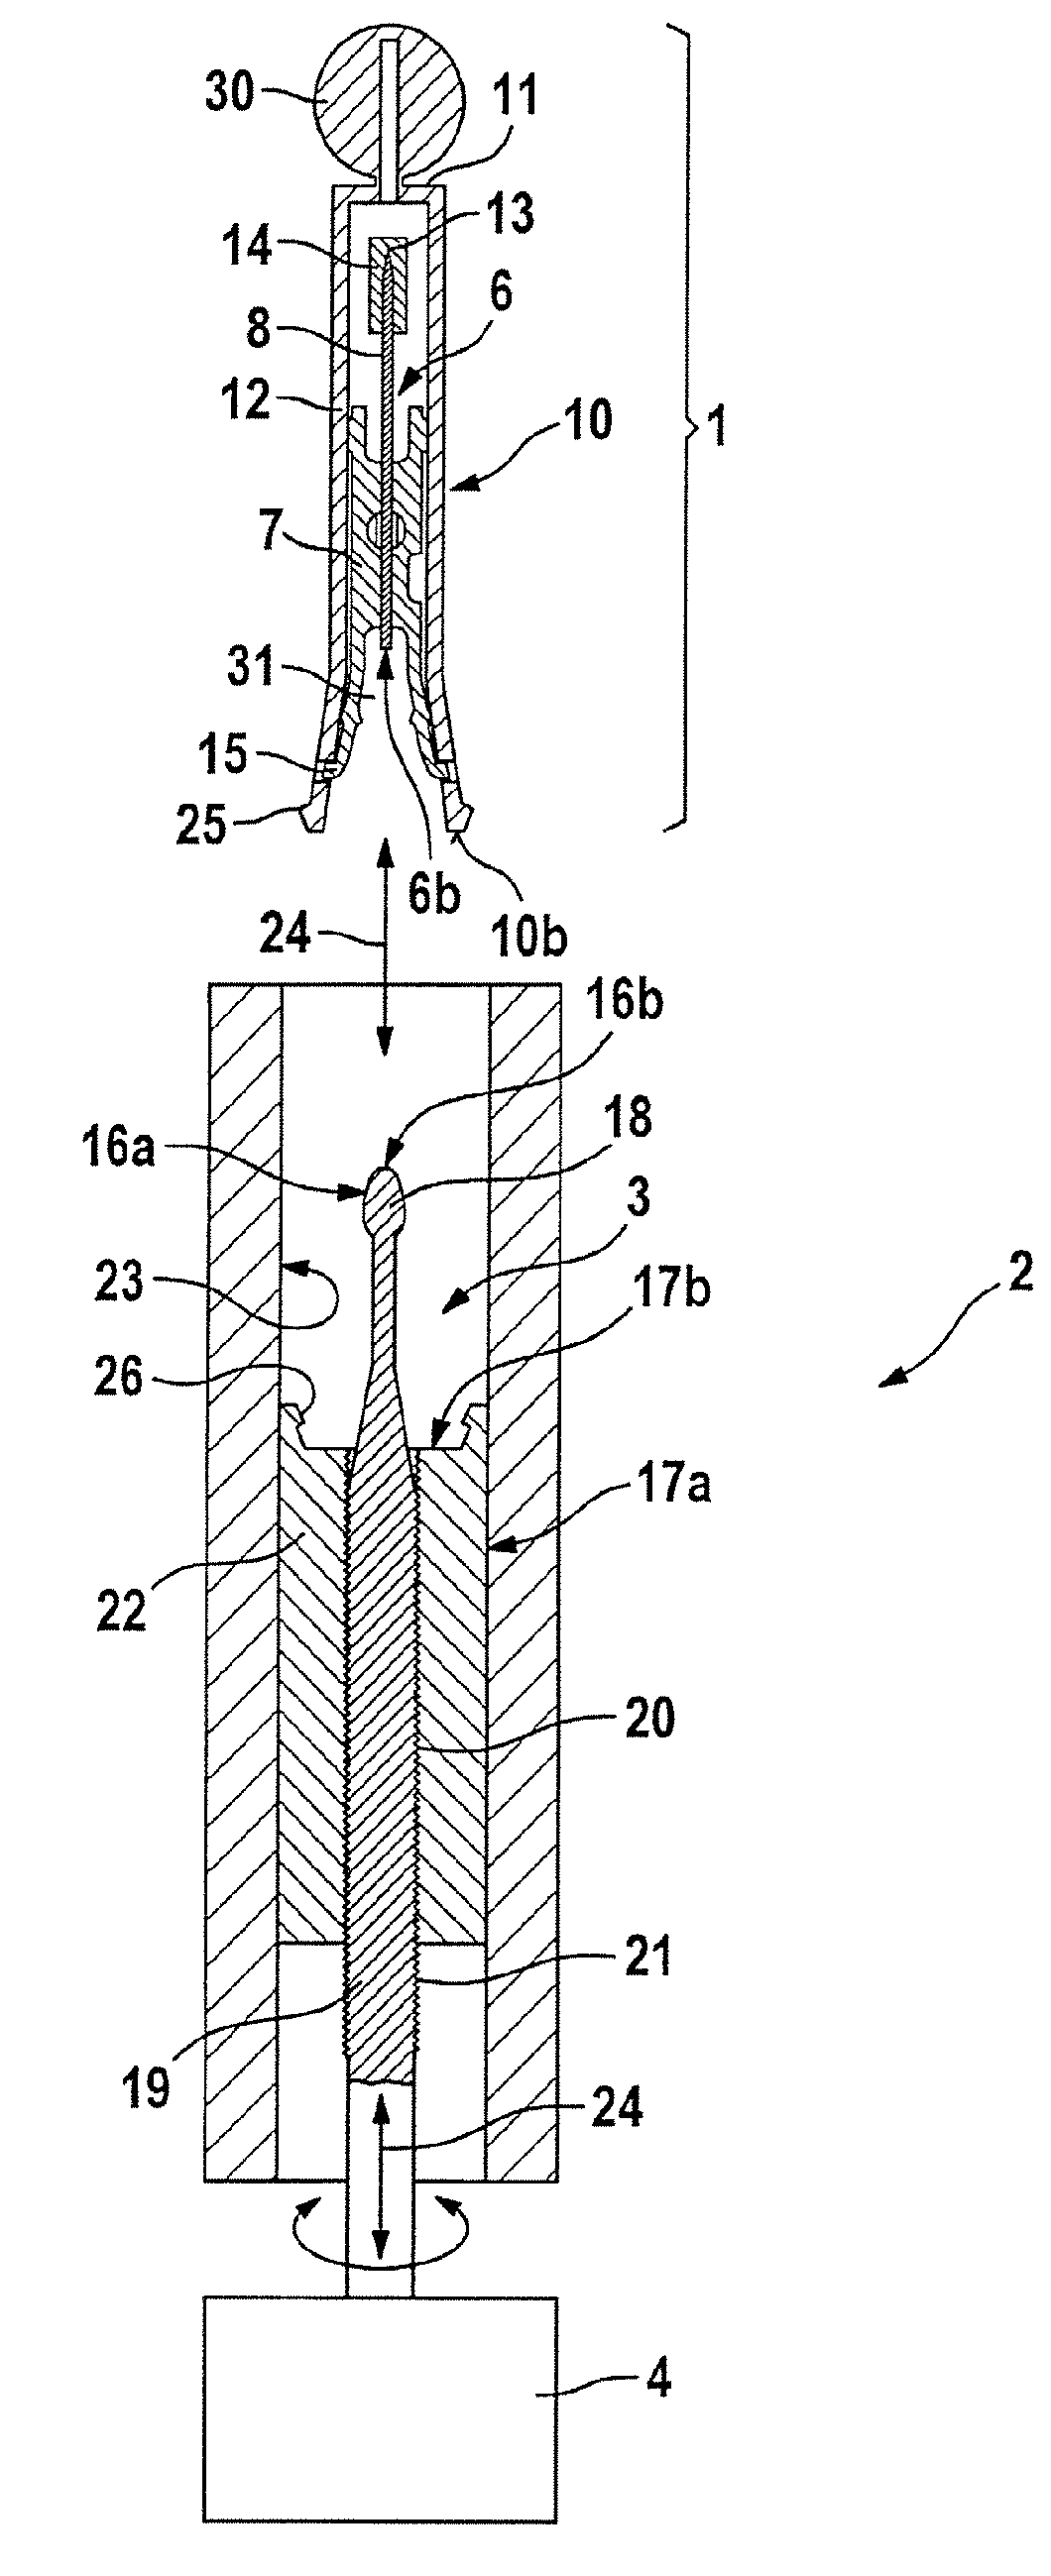 Puncturing system for withdrawing a body fluid